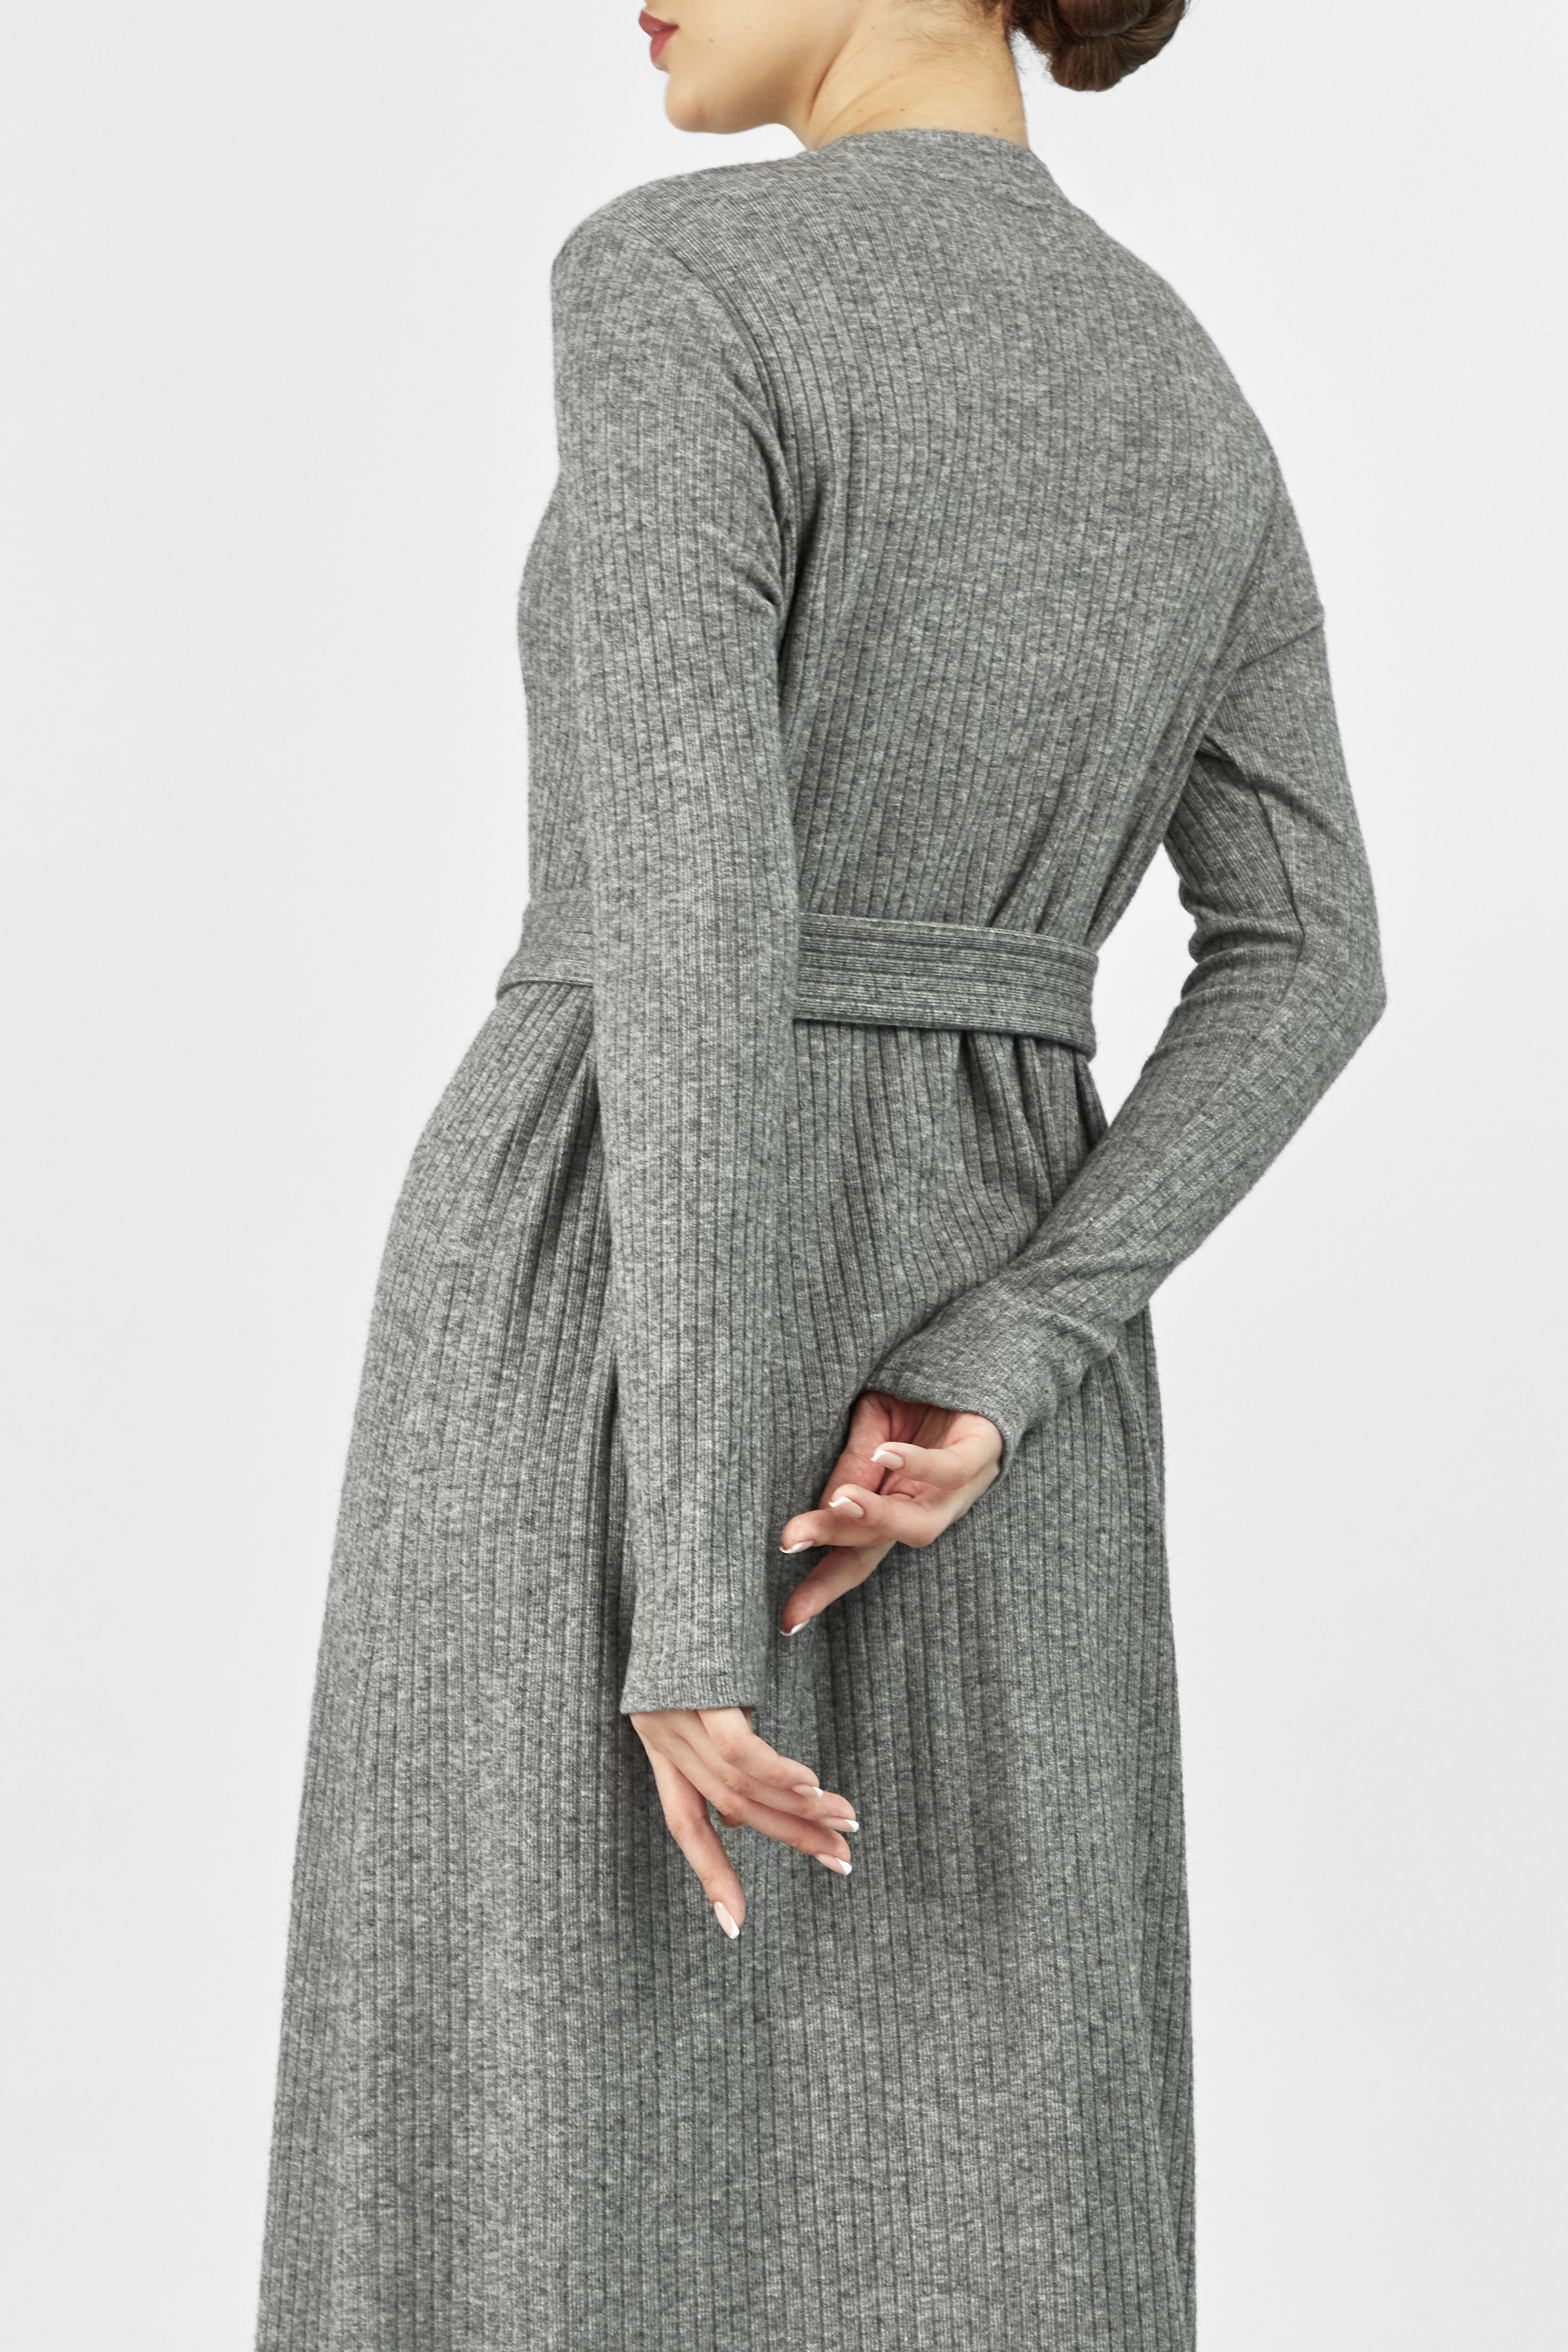 AE - Belted Knit Dress - Heather Grey